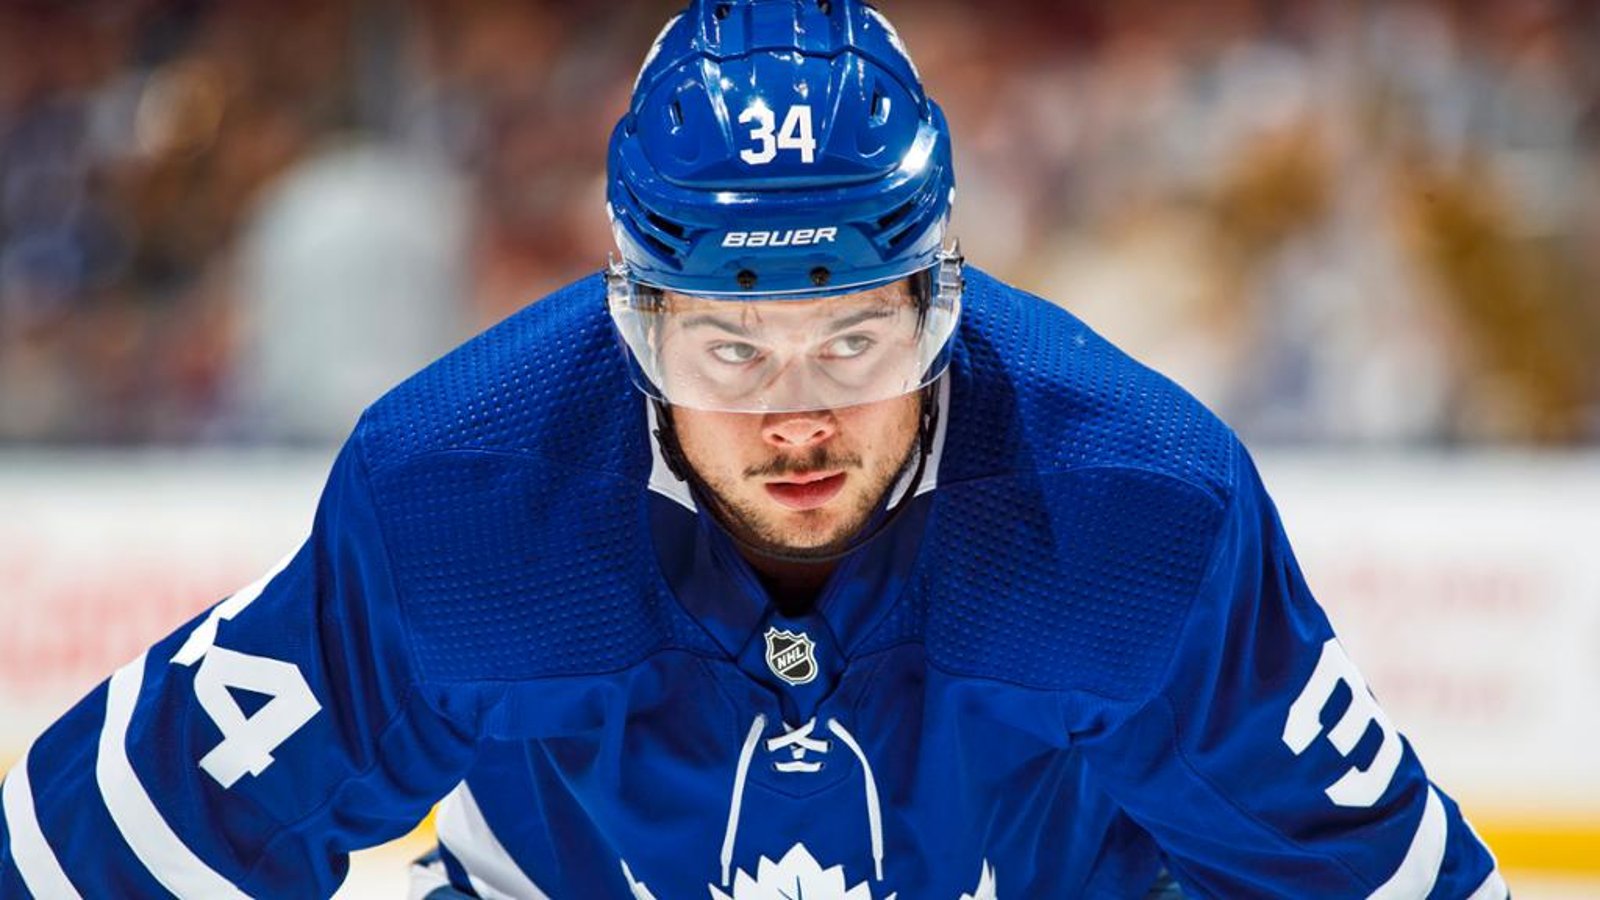 Matthews reportedly charged with disorderly conduct